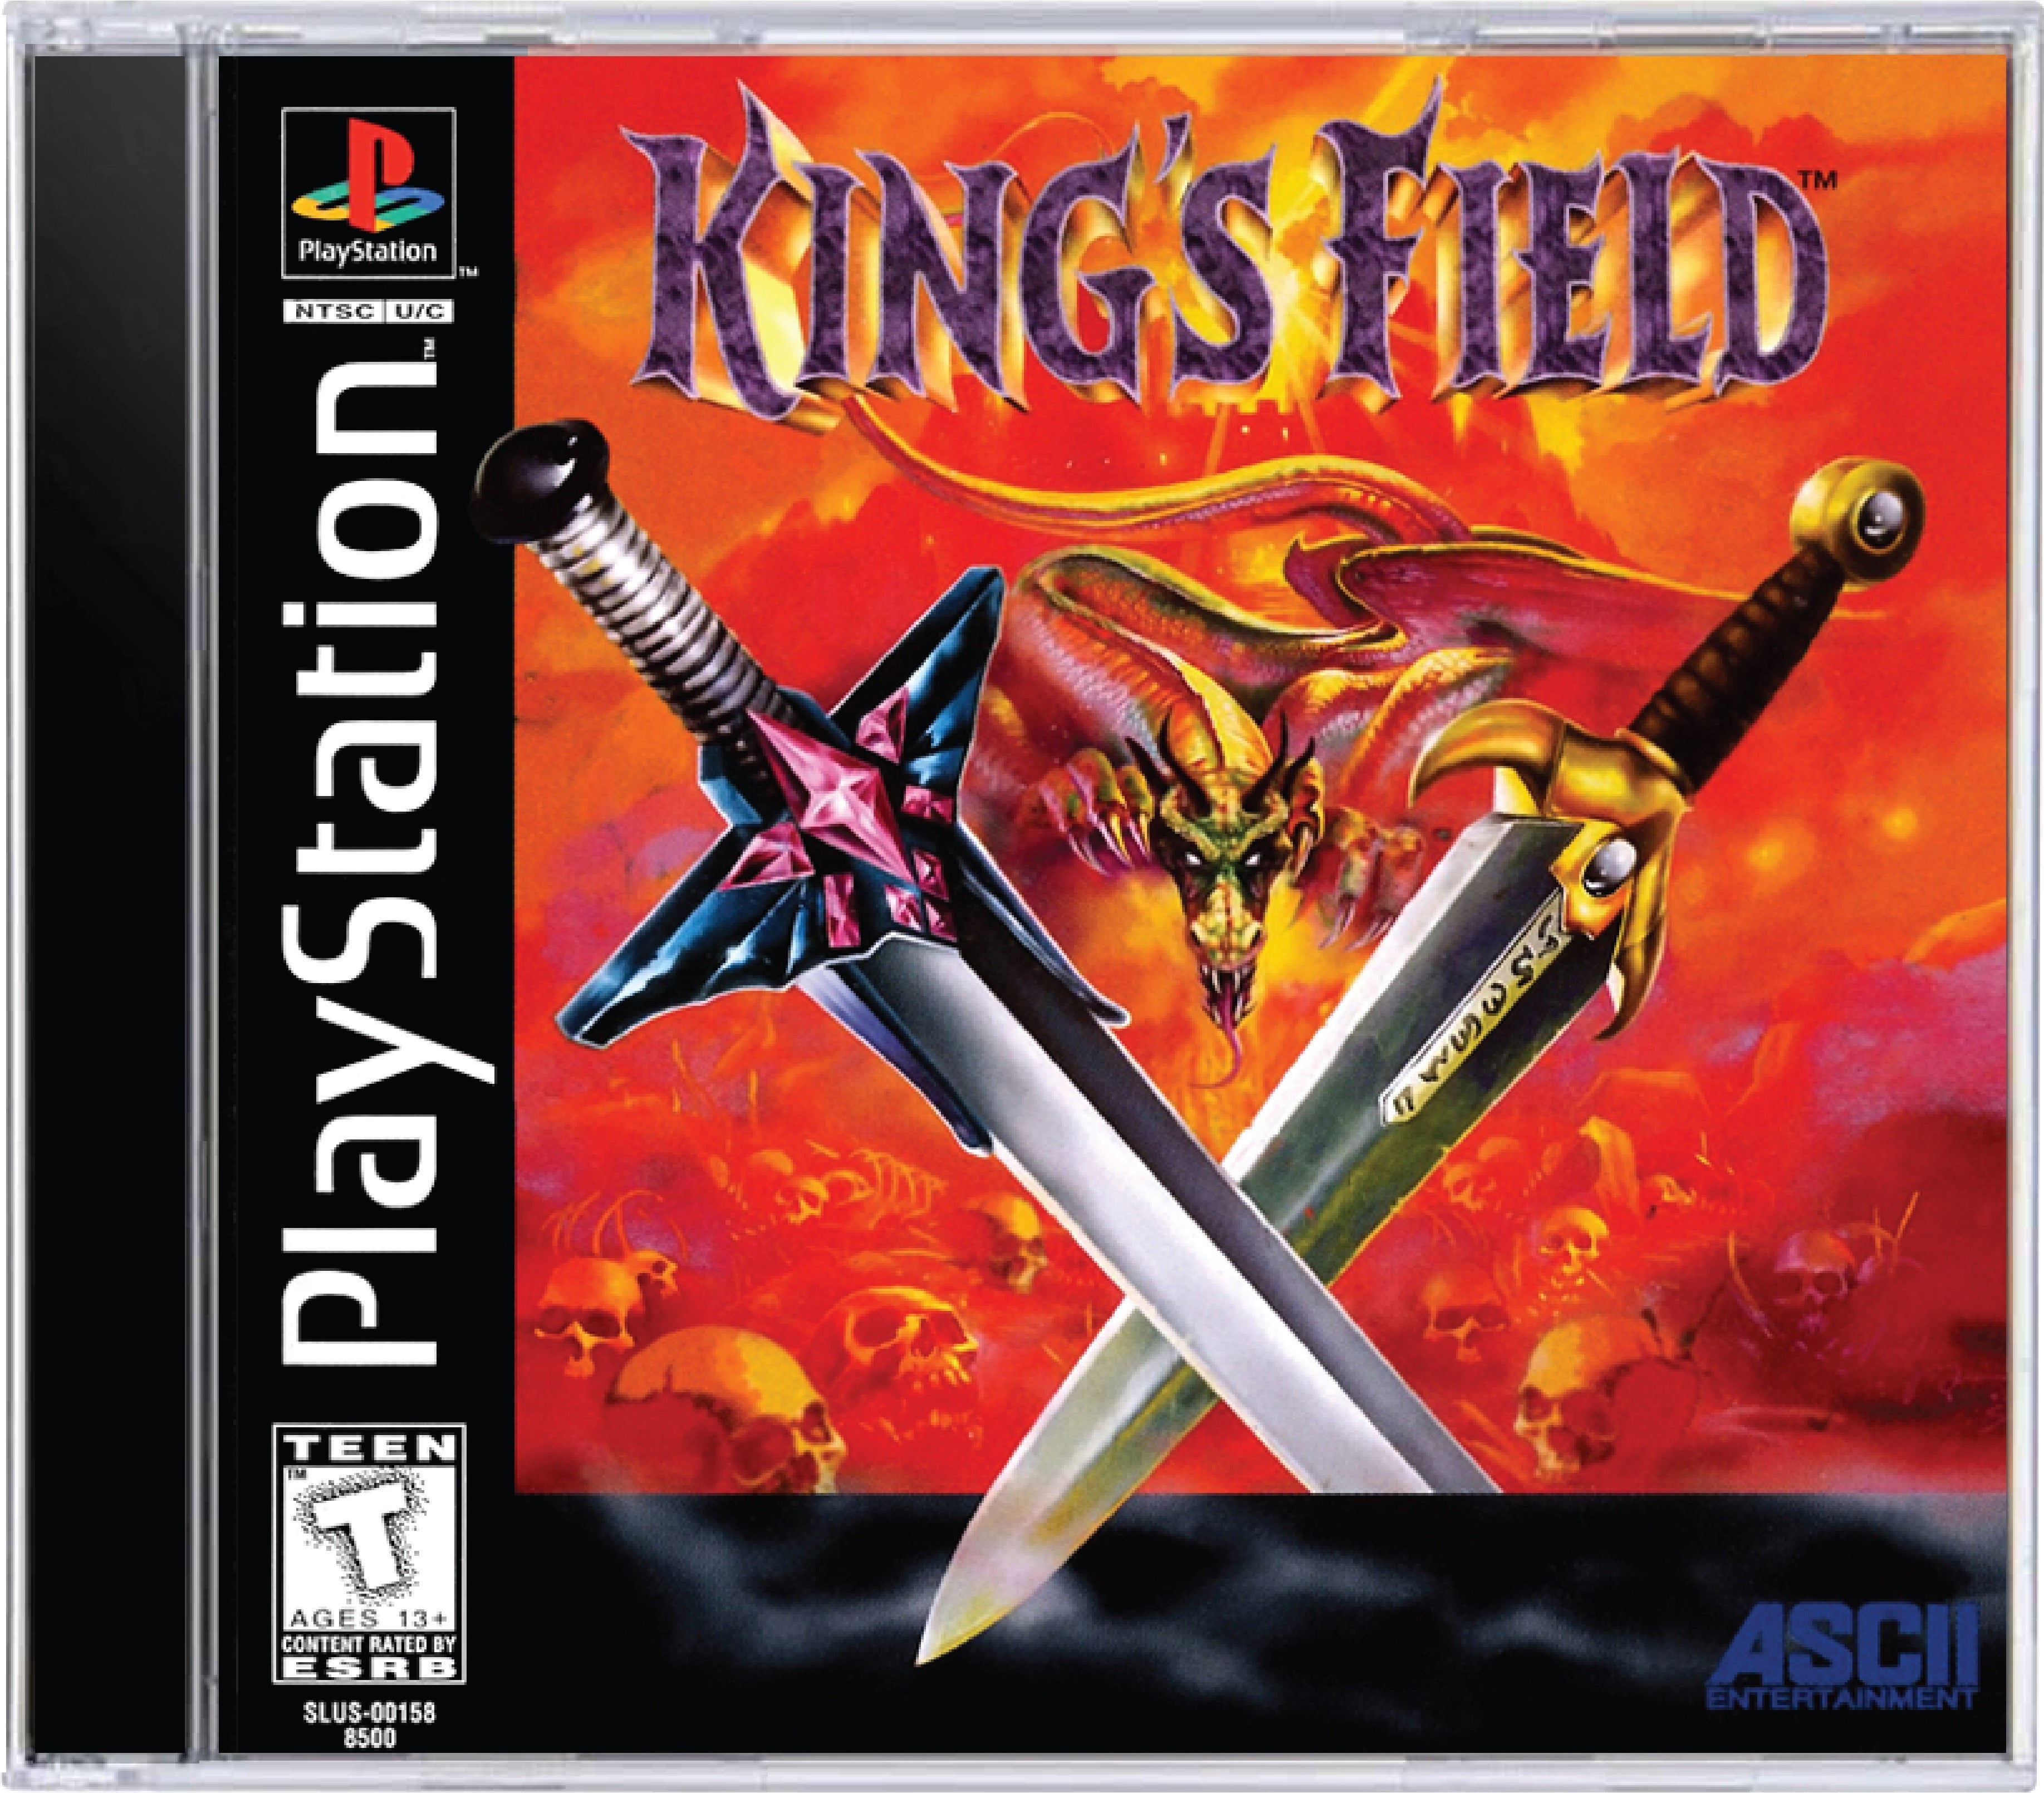 King's Field Cover Art and Product Photo